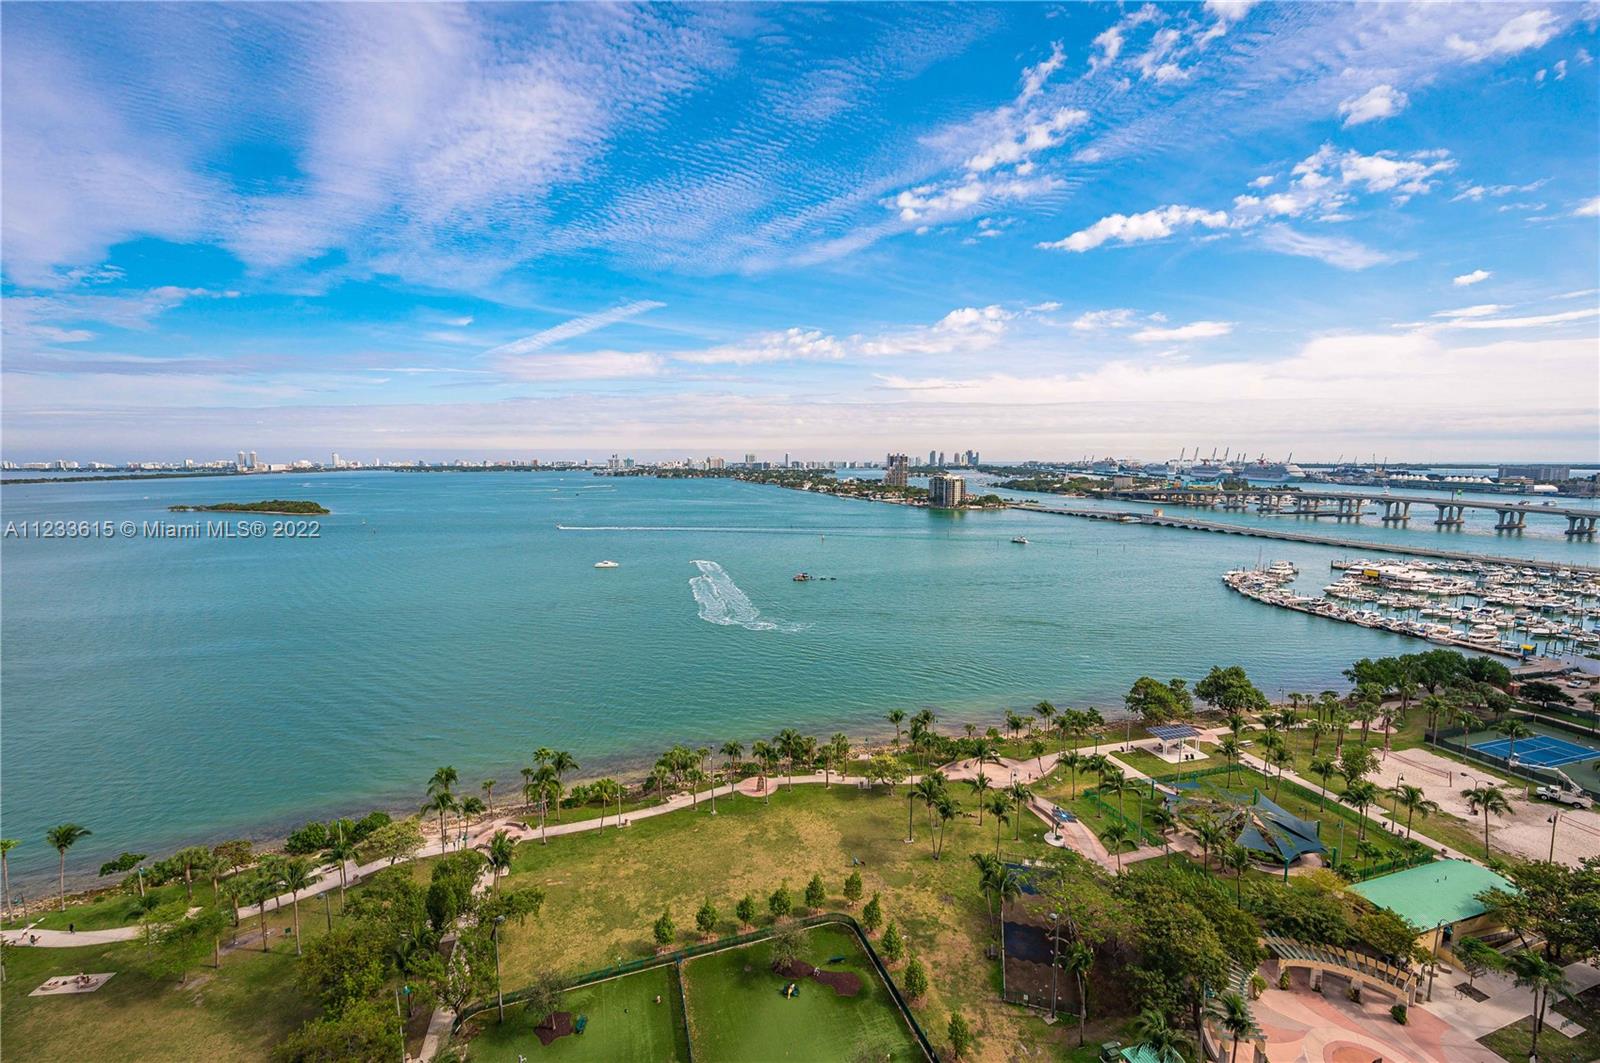 Most desirable and rarely available, 2 bed 2 bath with amazing unobstructed views of Biscayne Bay from every room. Located on the 22nd floor, 07 line is the larger of the 2 bed 2 bath split plan. Remodeled in 2019, the unit features ceramic floor throughout, impact windows, large private balcony 252 Sf. one storage and one assigned parking space. Full amenities building: valet, doorman, pool fitness center, resort-style pool deck and much more. Walk to Margaret Pace Park, only short drive to Wynwood Midtown restaurants Design district, shops, and Miami nightlife.